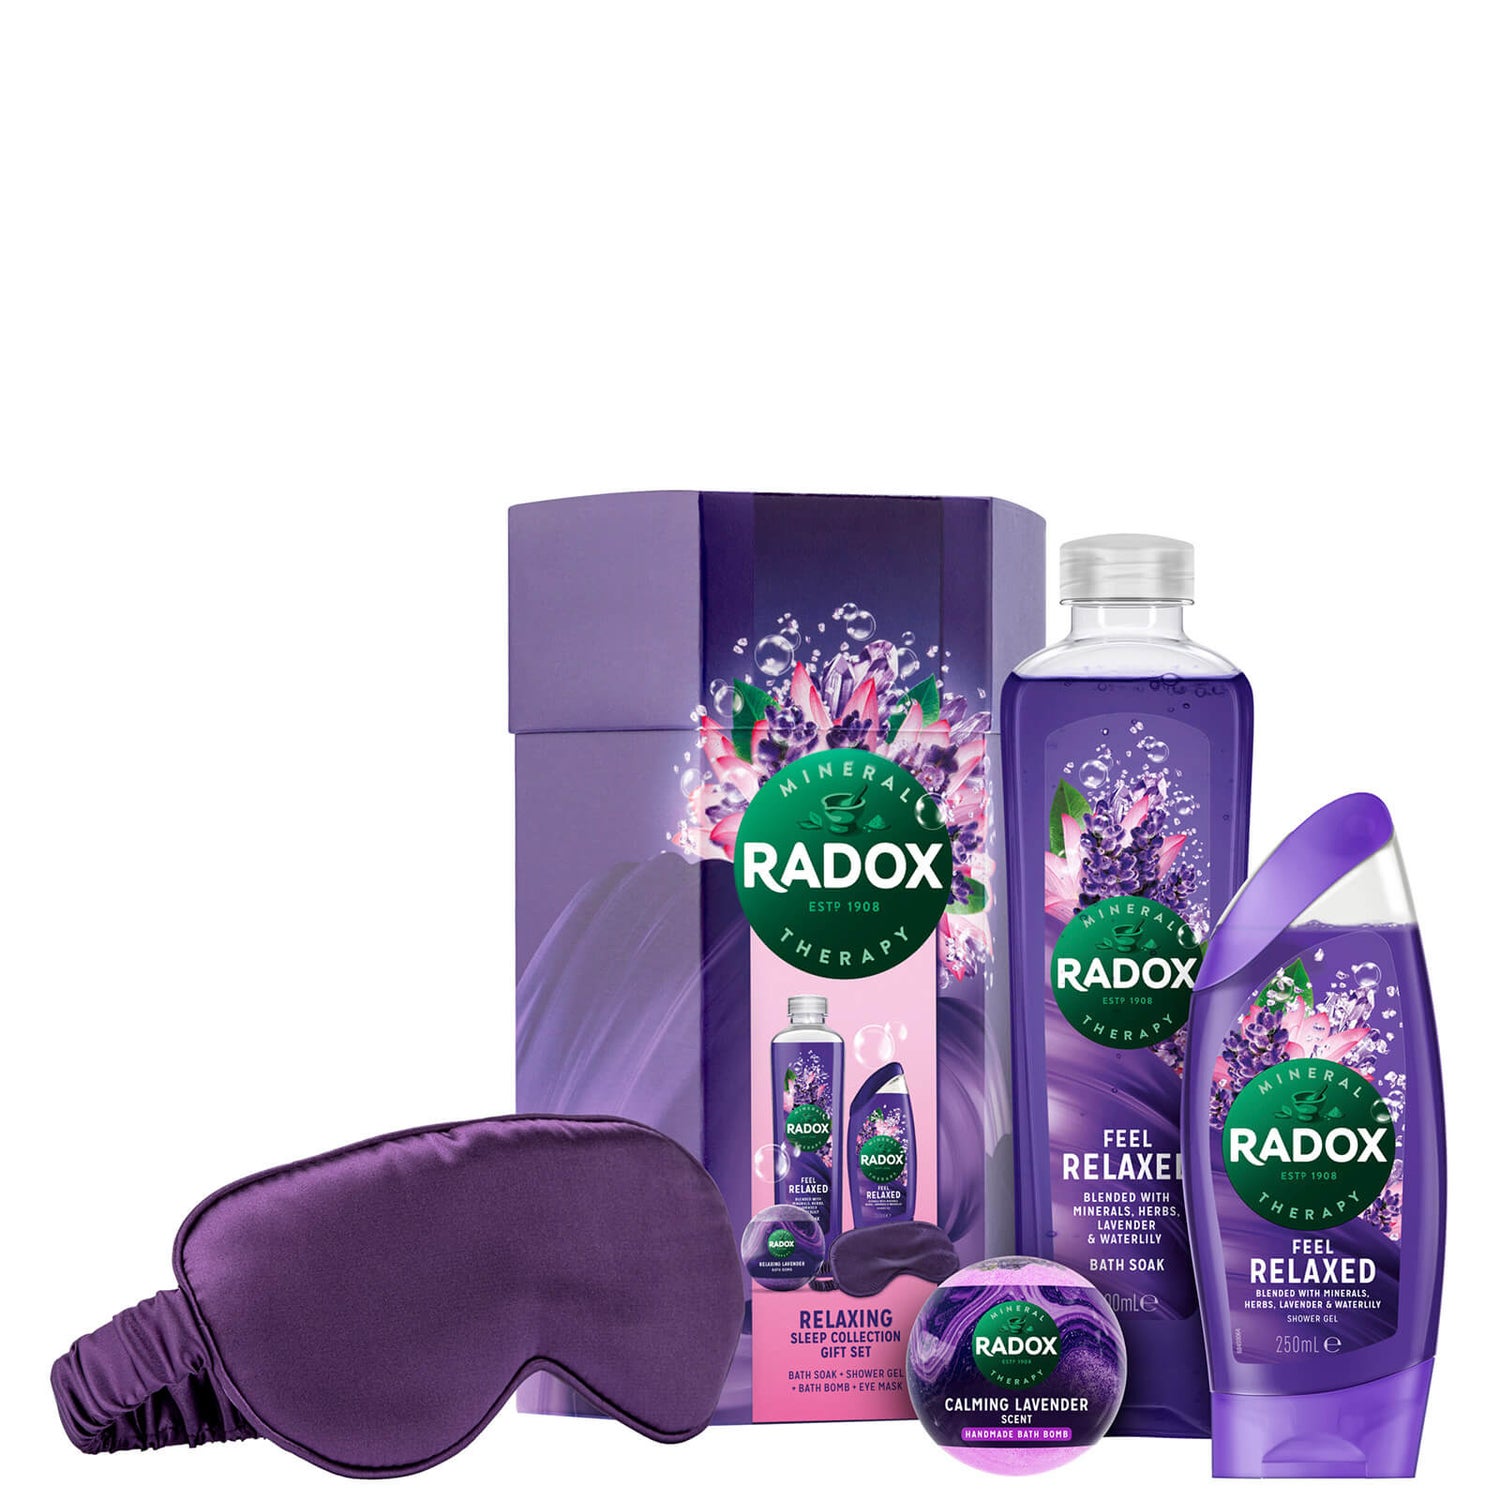 Radox Relaxing Sleep Collection Gift Set